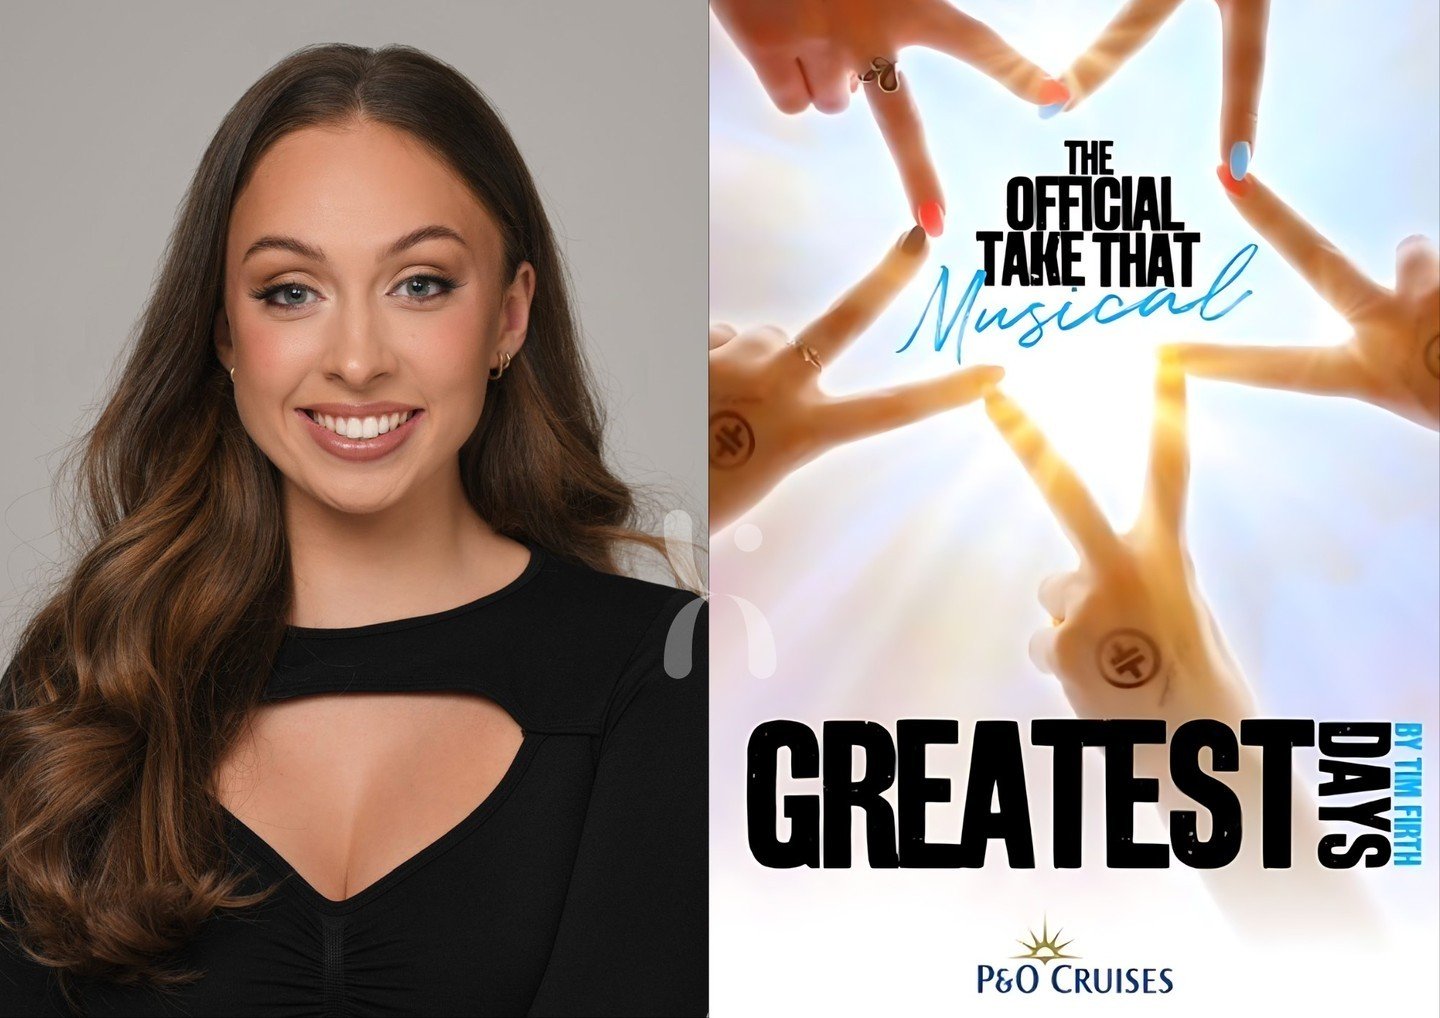 We&rsquo;d like to extend a huge congratulations to Hammond Professional Dance grad Ellie Wolfenden who&rsquo;ll be performing in GREATEST DAYS: The Take That musical on board the P&amp;O Iona. Ellie will also be company manager on this contract &hea